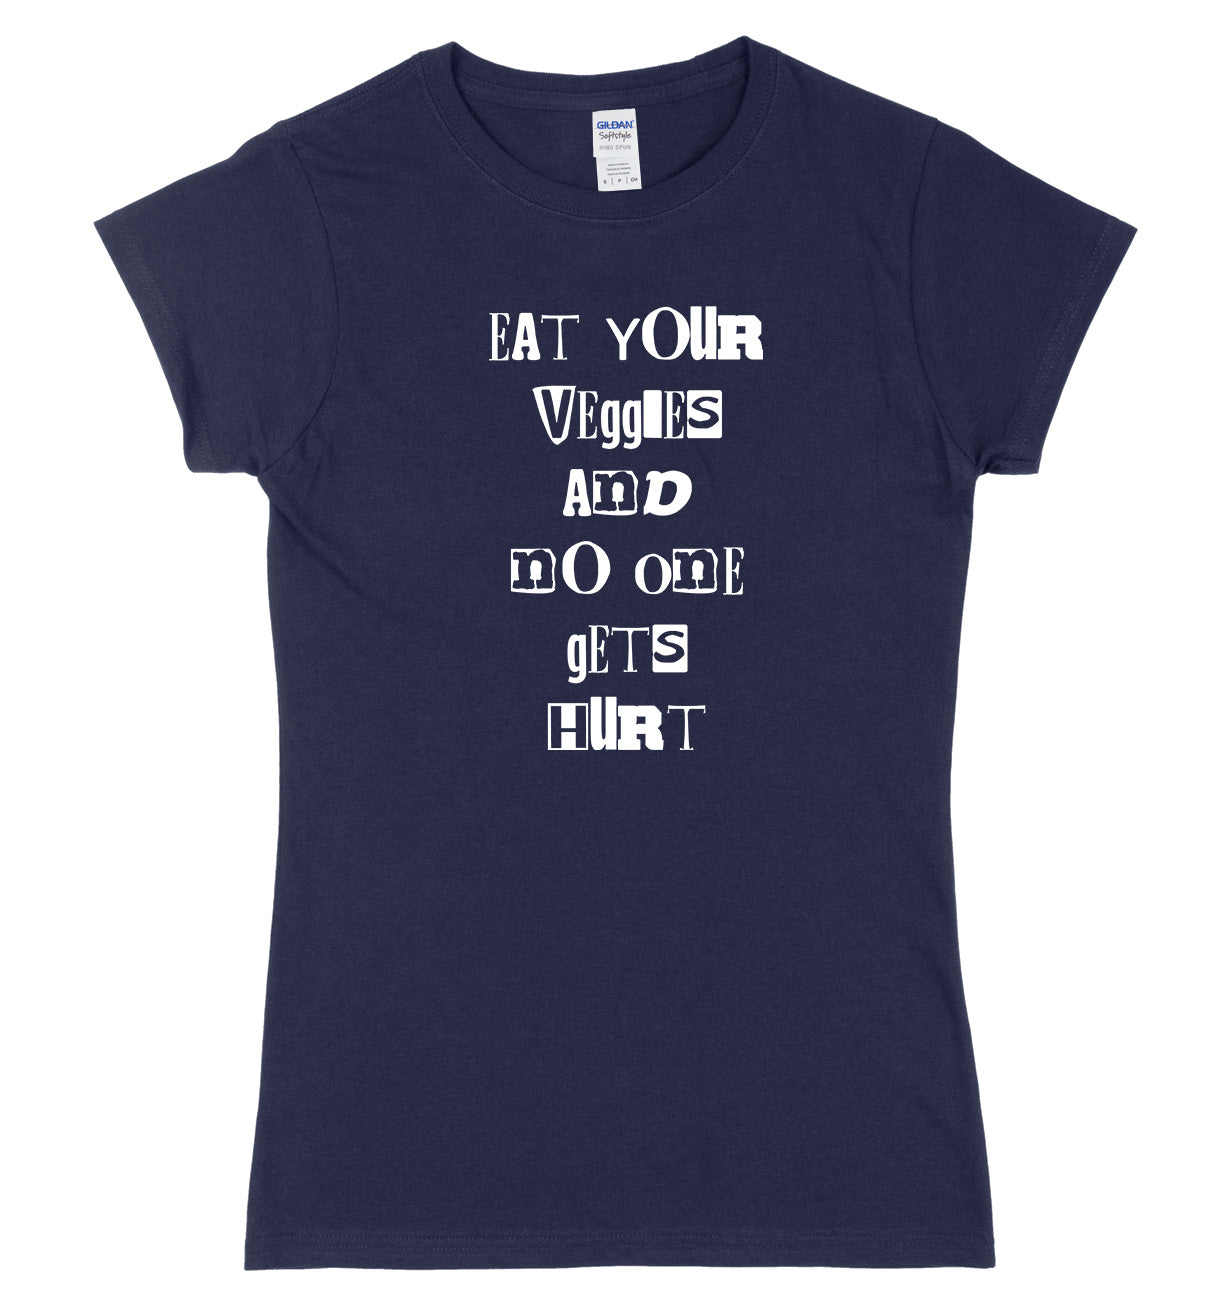 Eat Your Veggies And No One Gets Hurt Womens Ladies Slim Fit T-Shirt